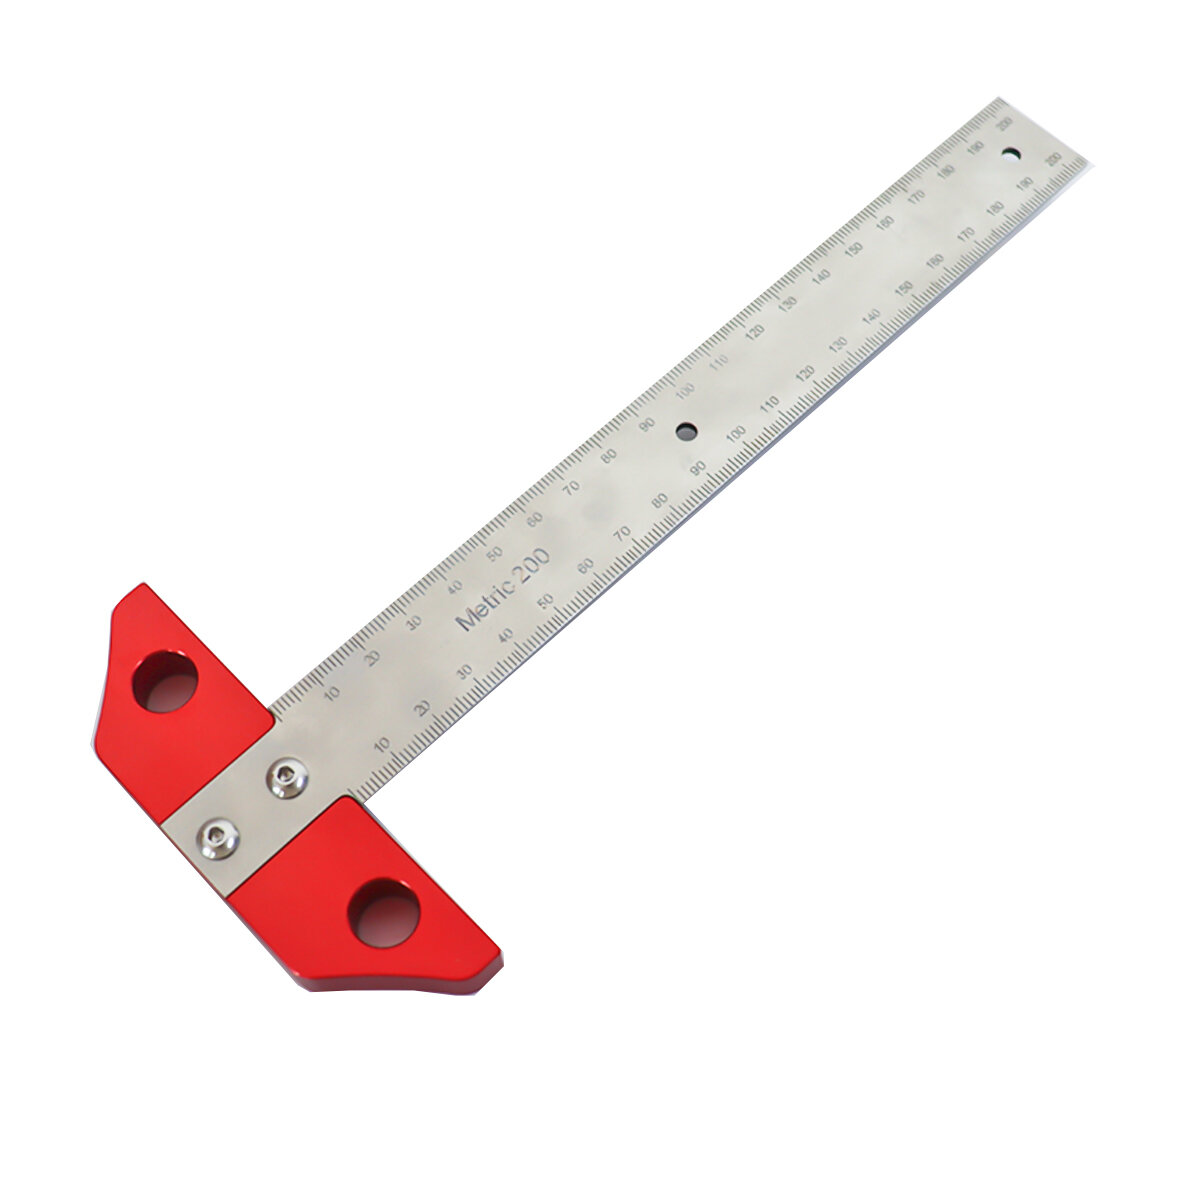 

8 Inch/200mm T Square Marking Measuring Ruler Imperial Metric Scale Woodworking Scribing Ruler Gauging Tool